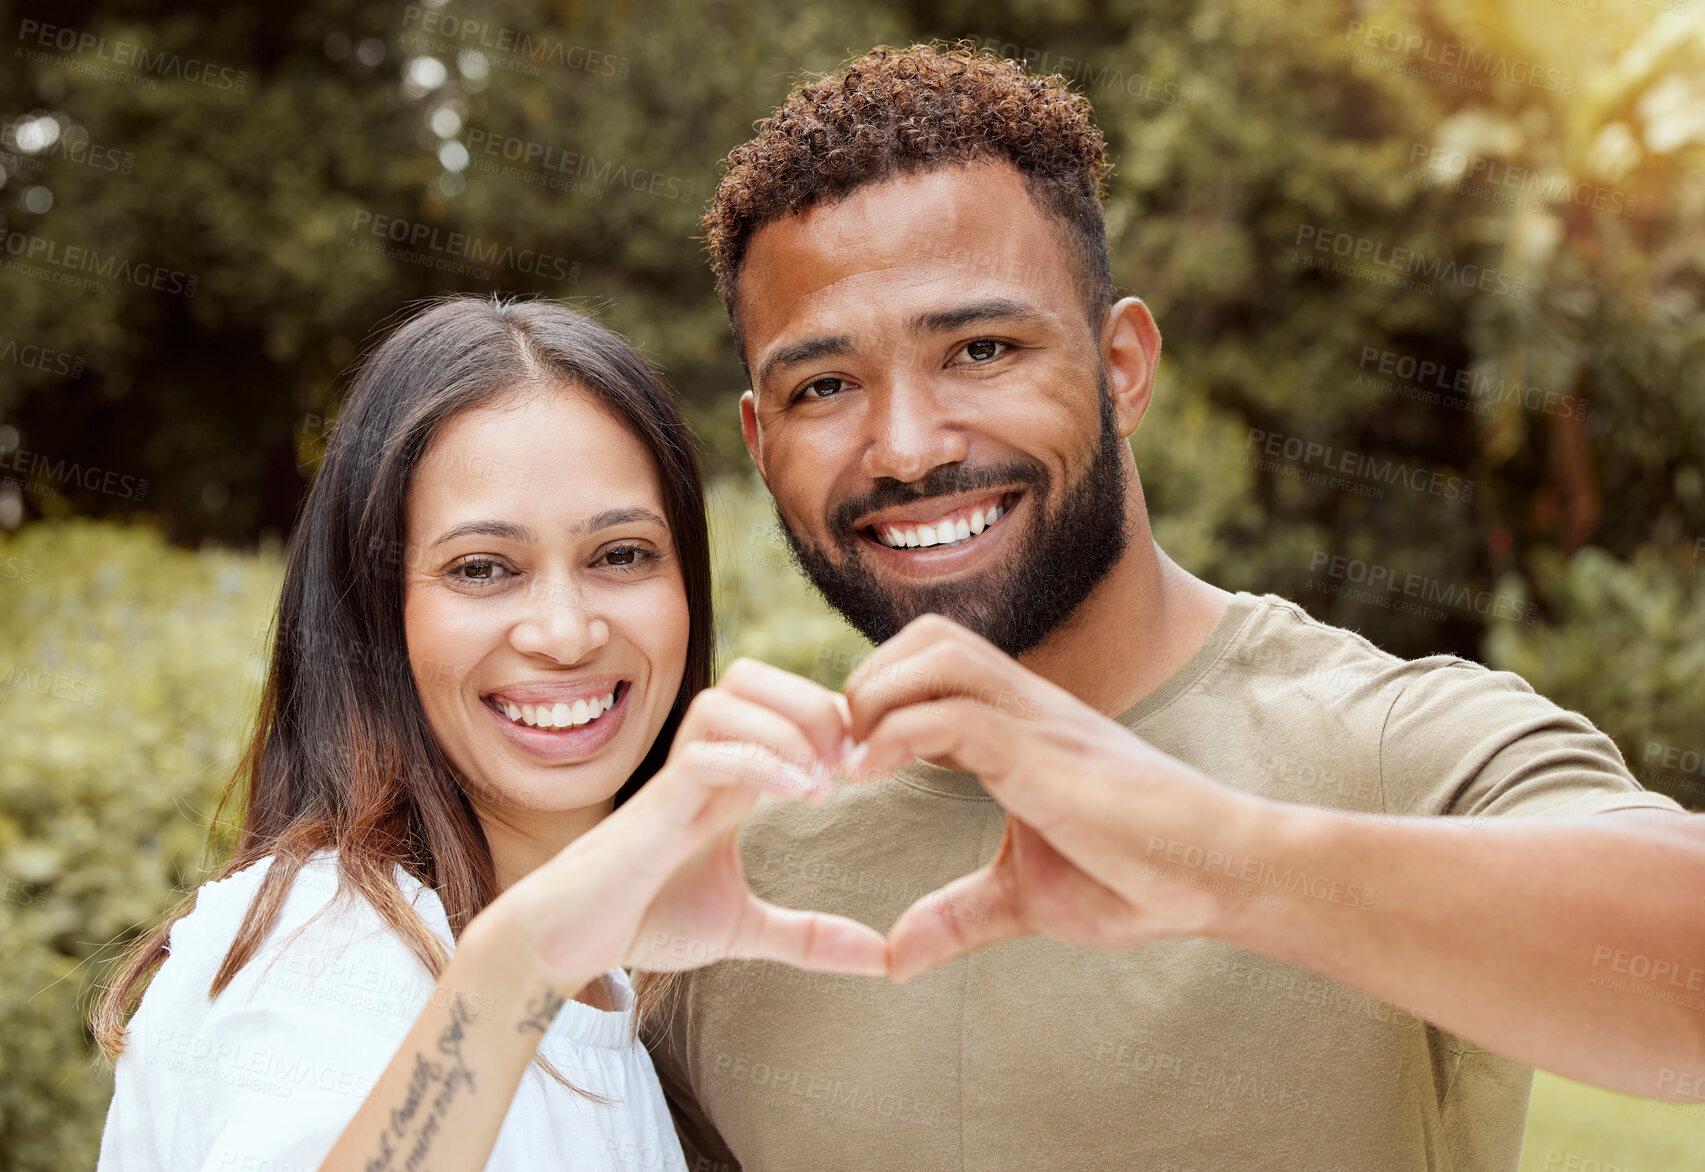 Buy stock photo Couple, happy and hand heart sign in a nature park showing love and a smile outdoor. Black people with happiness and care putting hands together to show solidarity, trust and romantic commitment